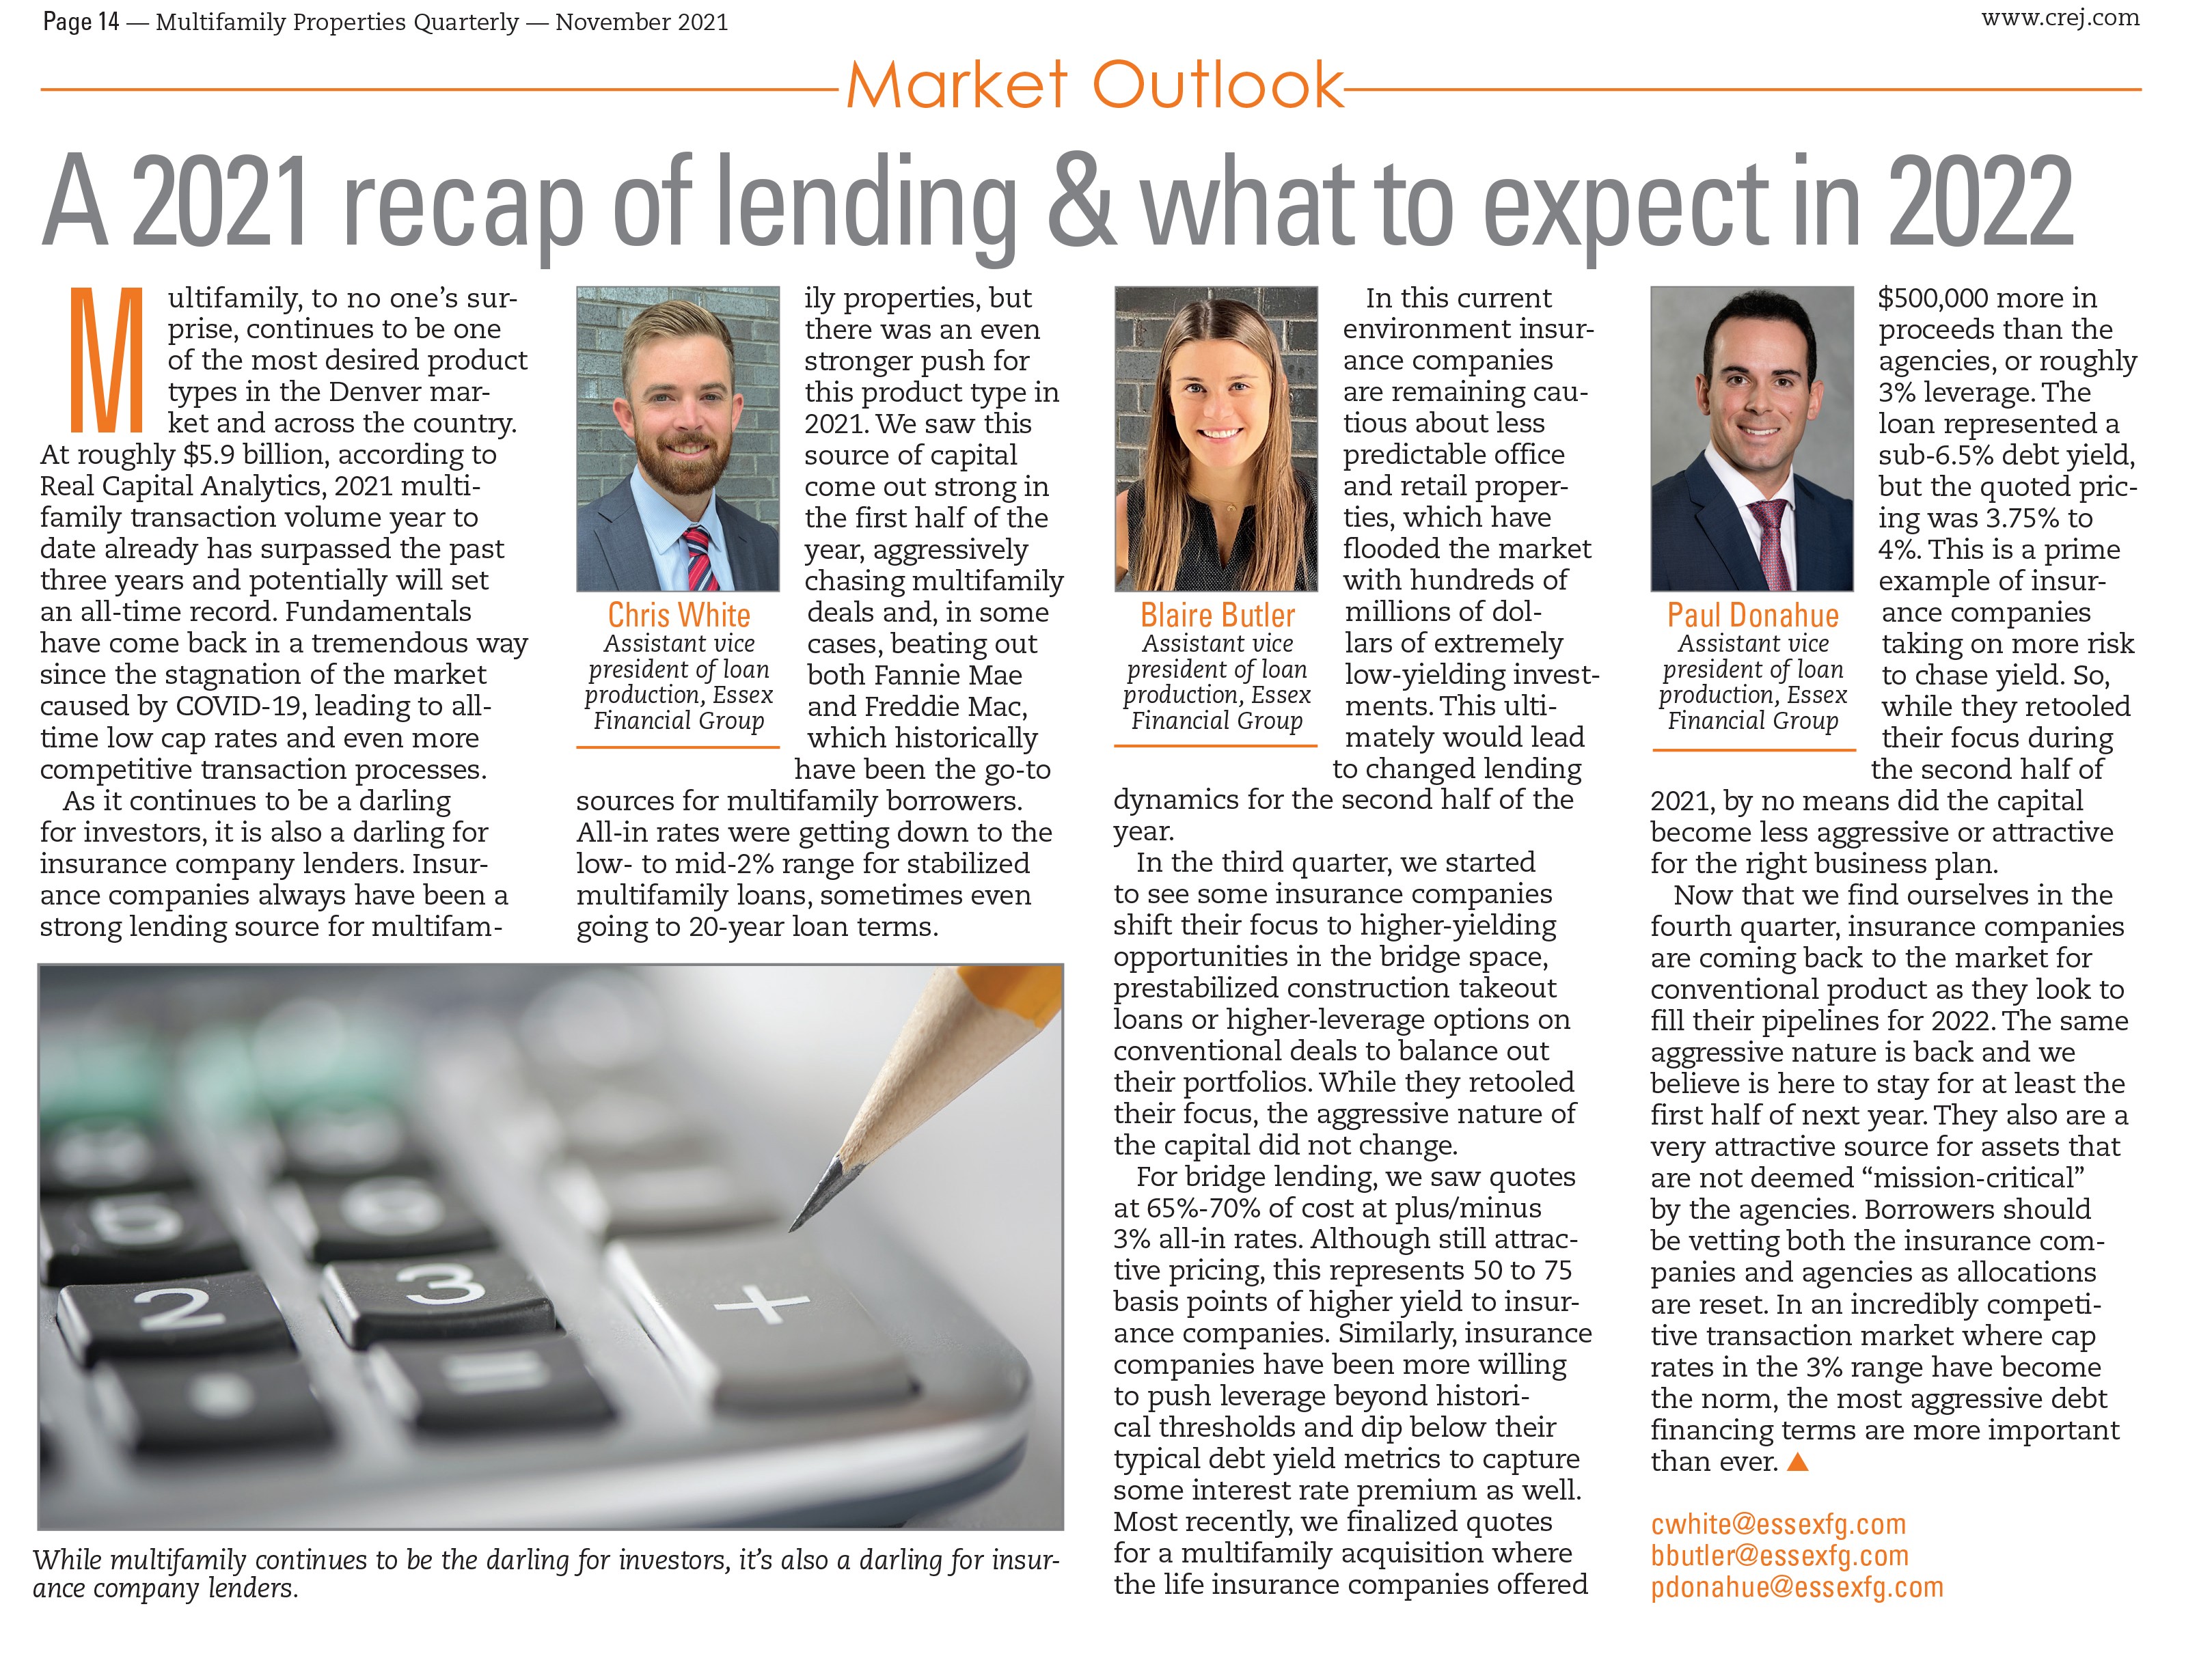 A 2021 Recap of Lending & What to Expect in 2022 Featured Image